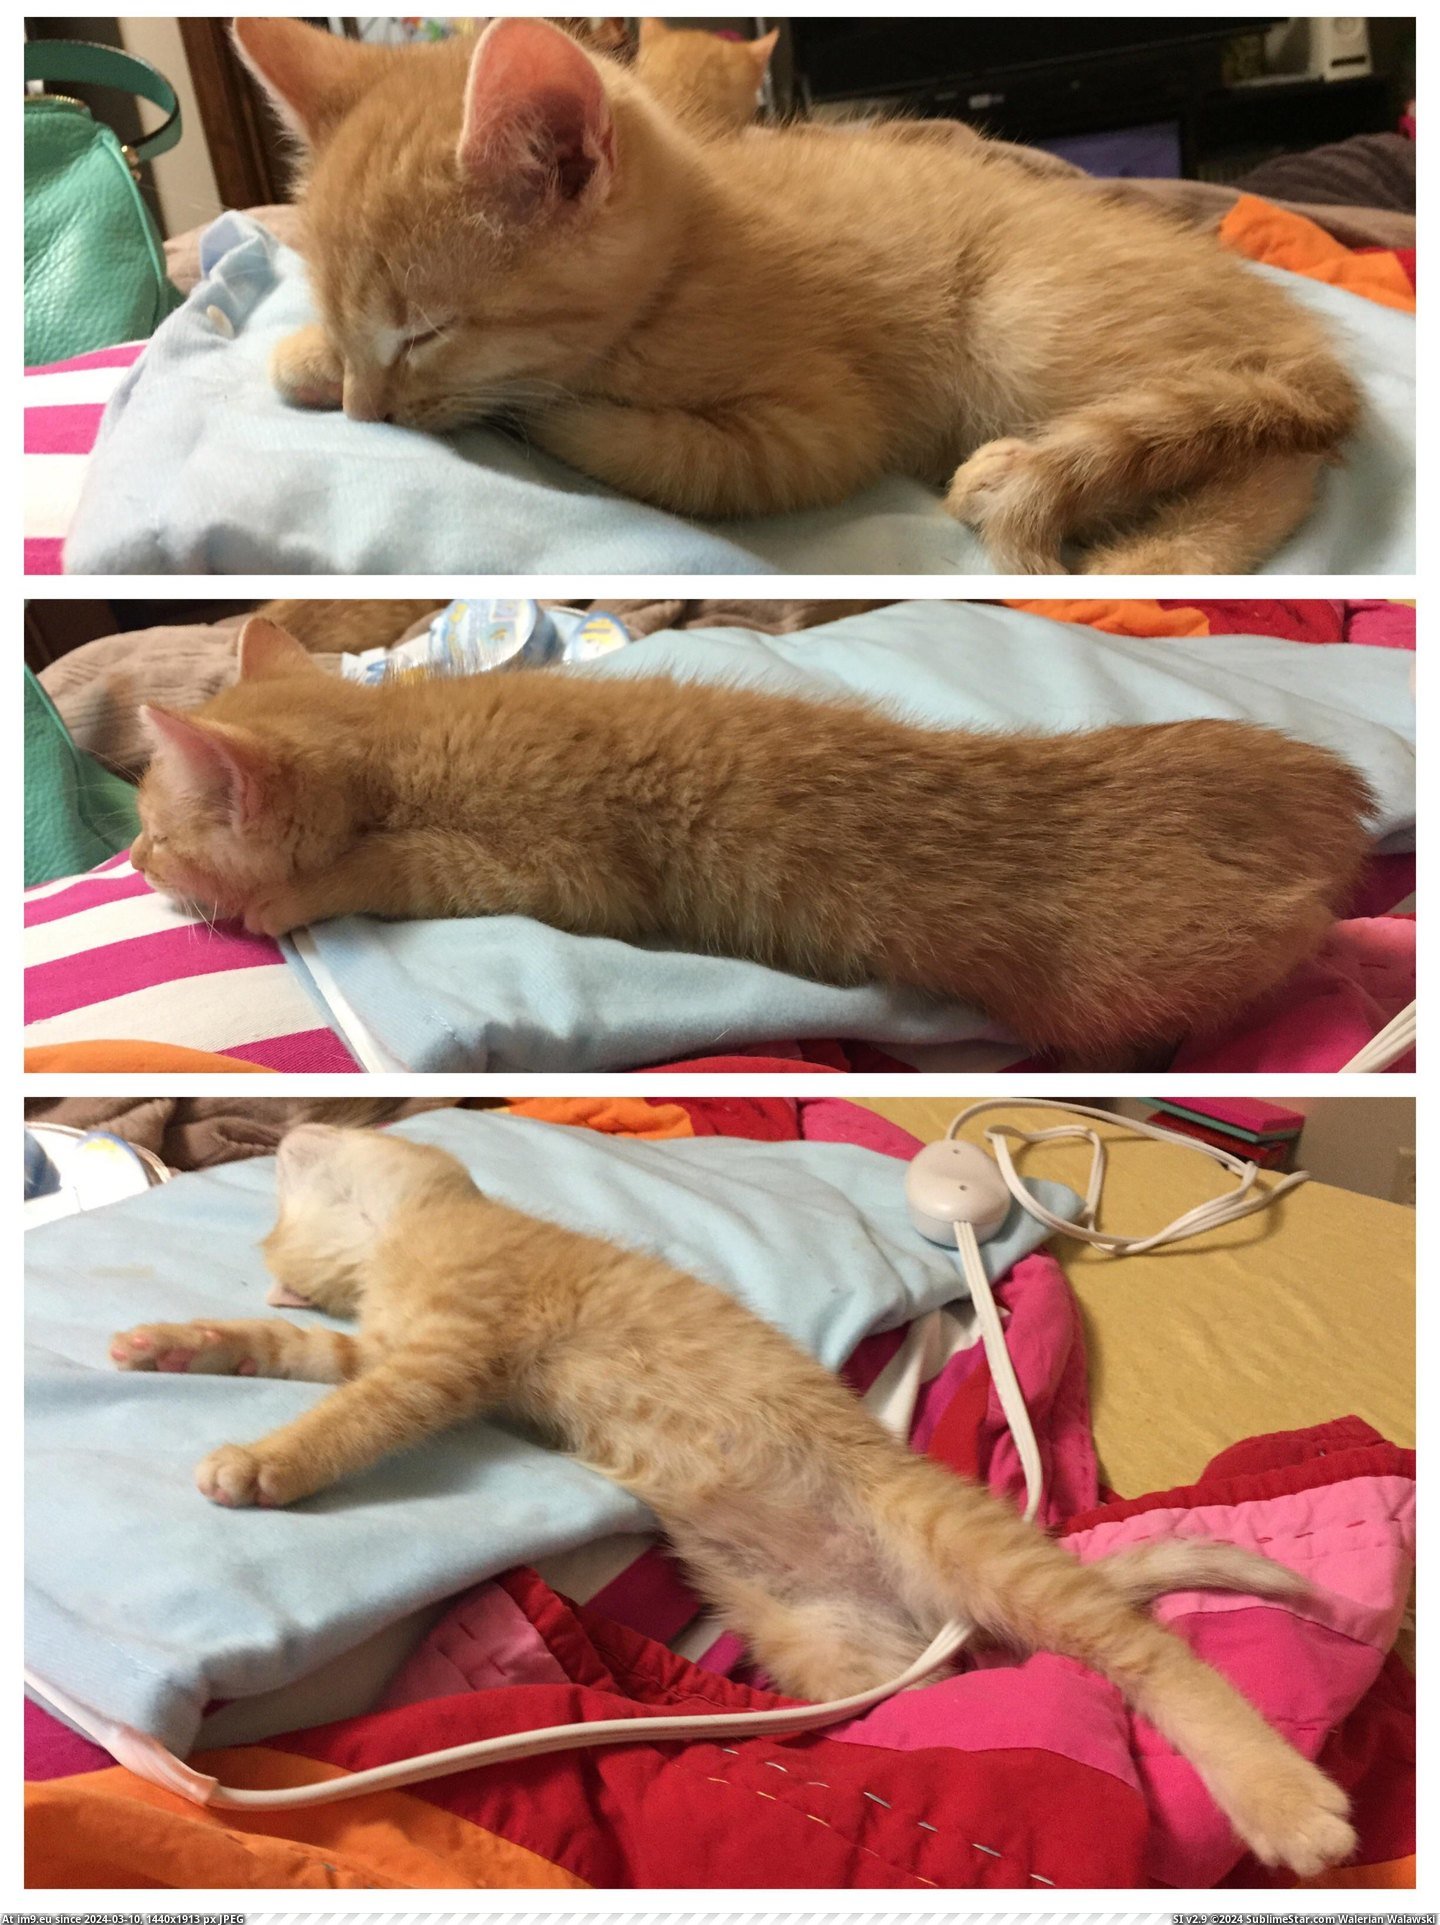 #Cats #Positions #Heating #Warmed #Olivia #Pad [Cats] Olivia's positions as she warmed up on the heating pad Pic. (Изображение из альбом My r/CATS favs))